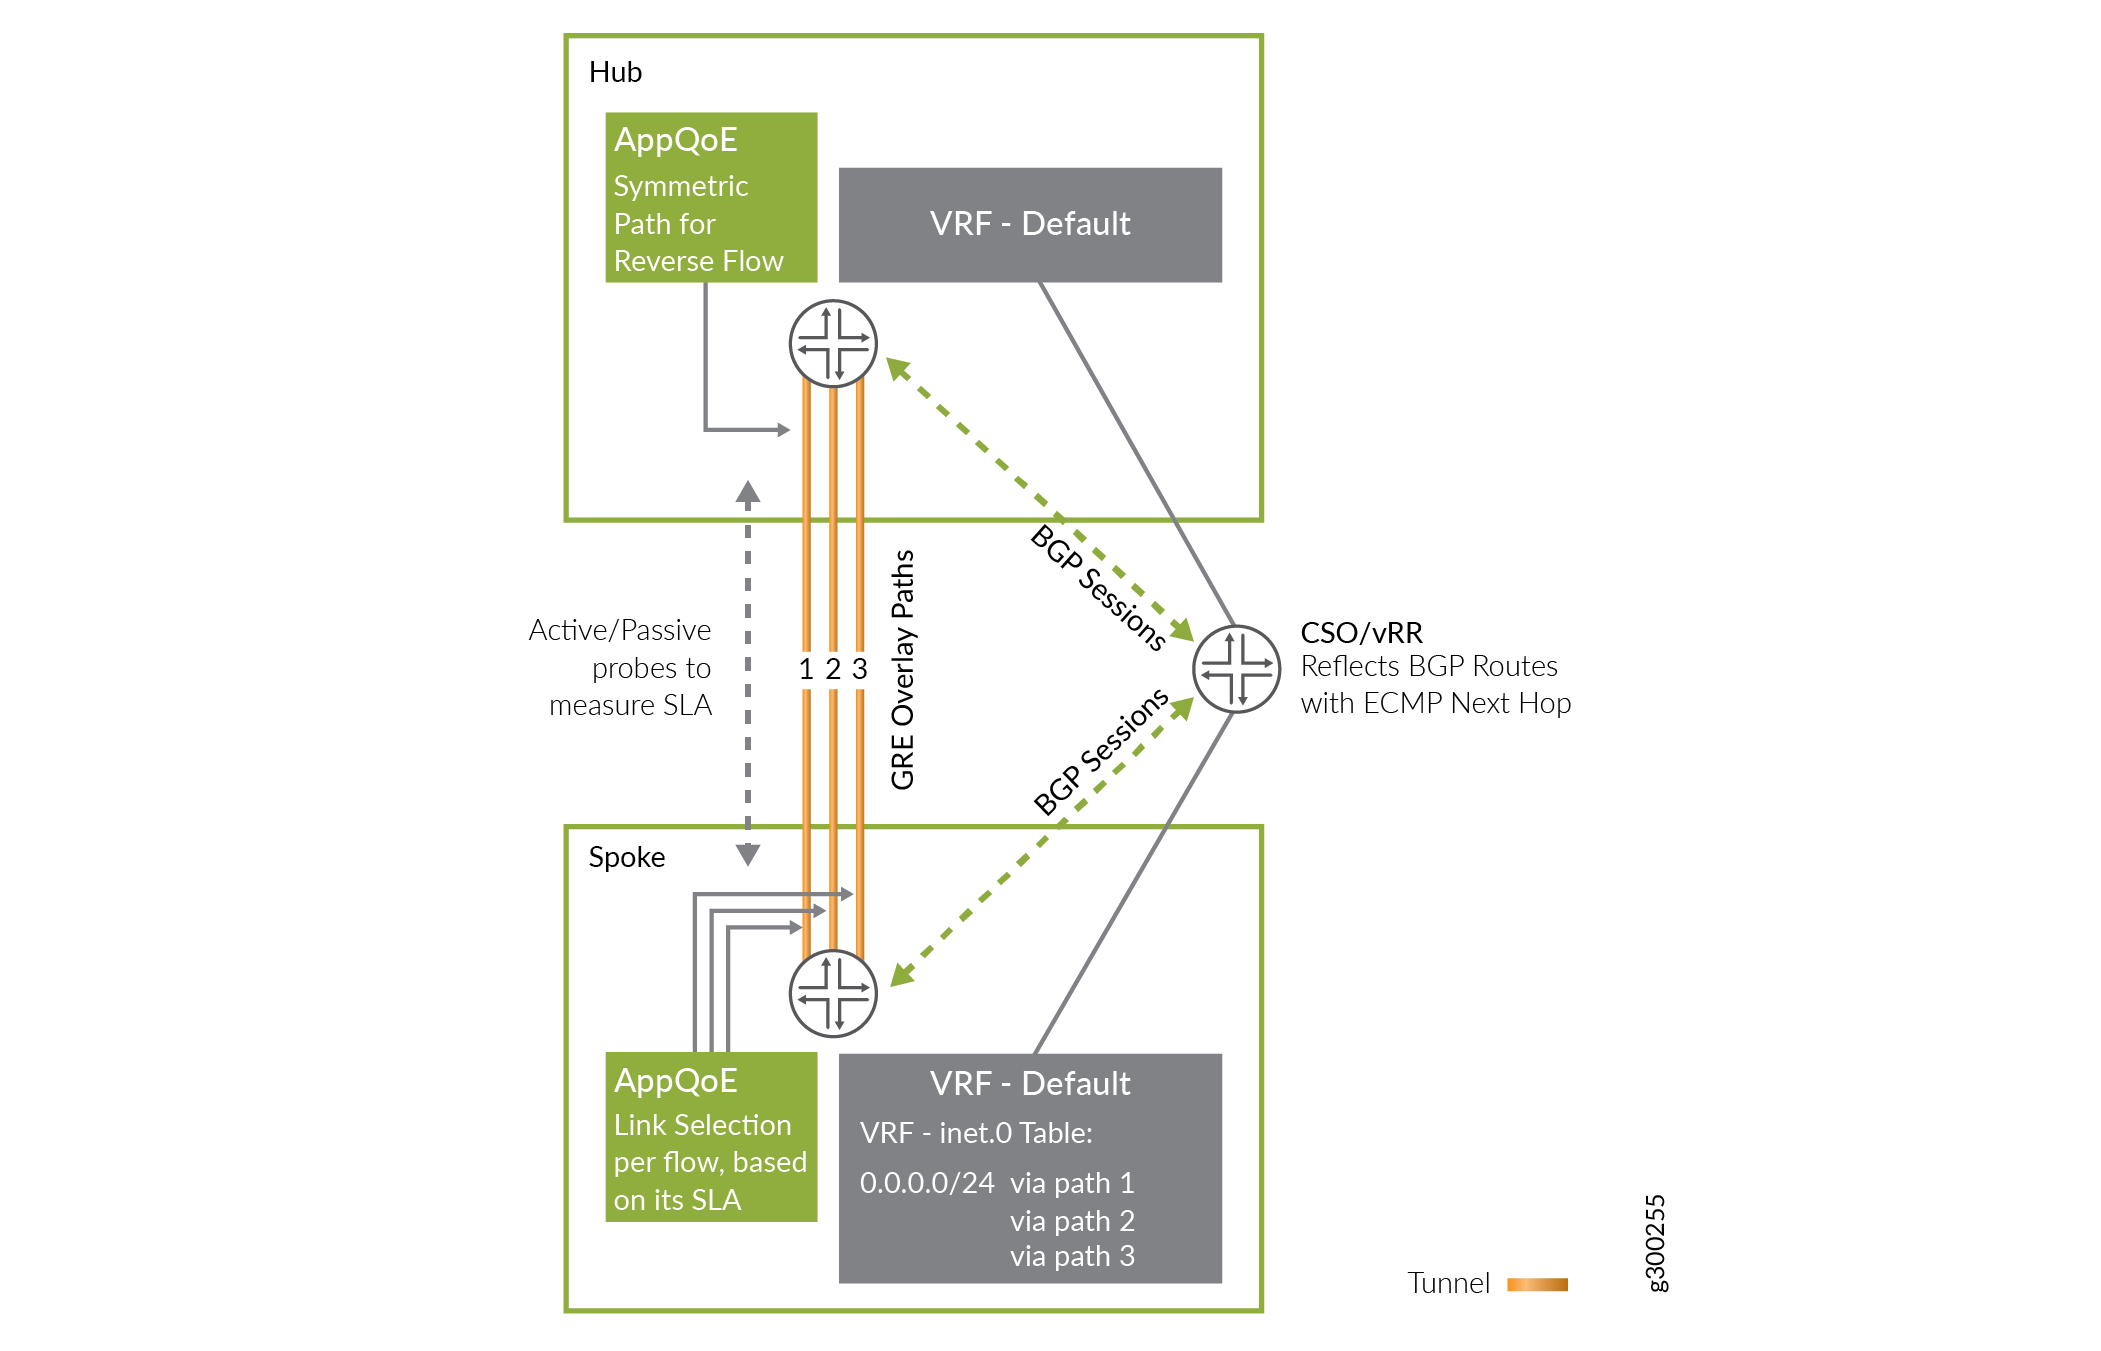 Real-Time Optimized (AppQoE) Routing Architecture